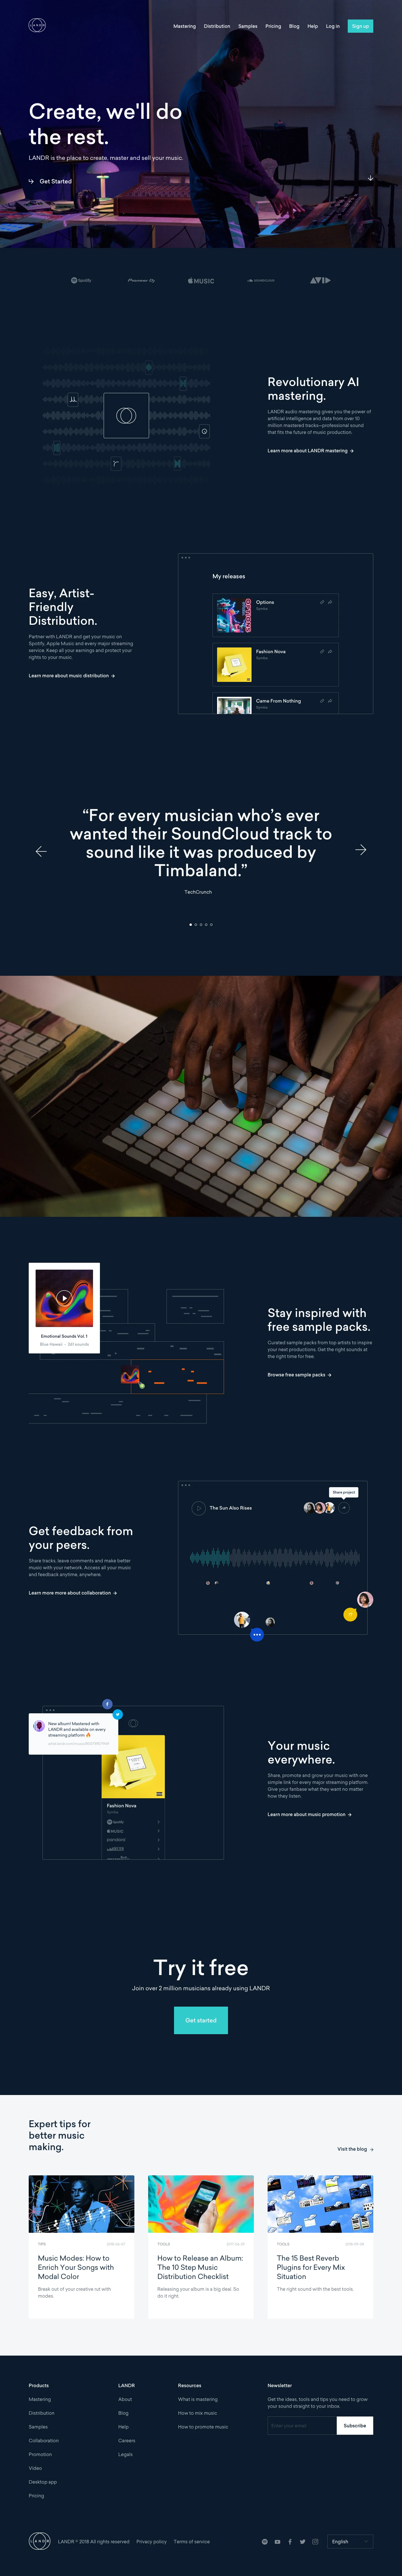 LANDR Landing Page Example: LANDR is online music software for creators: music mastering, digital music distribution, free sample packs, collaboration tools, music promotion, and more.